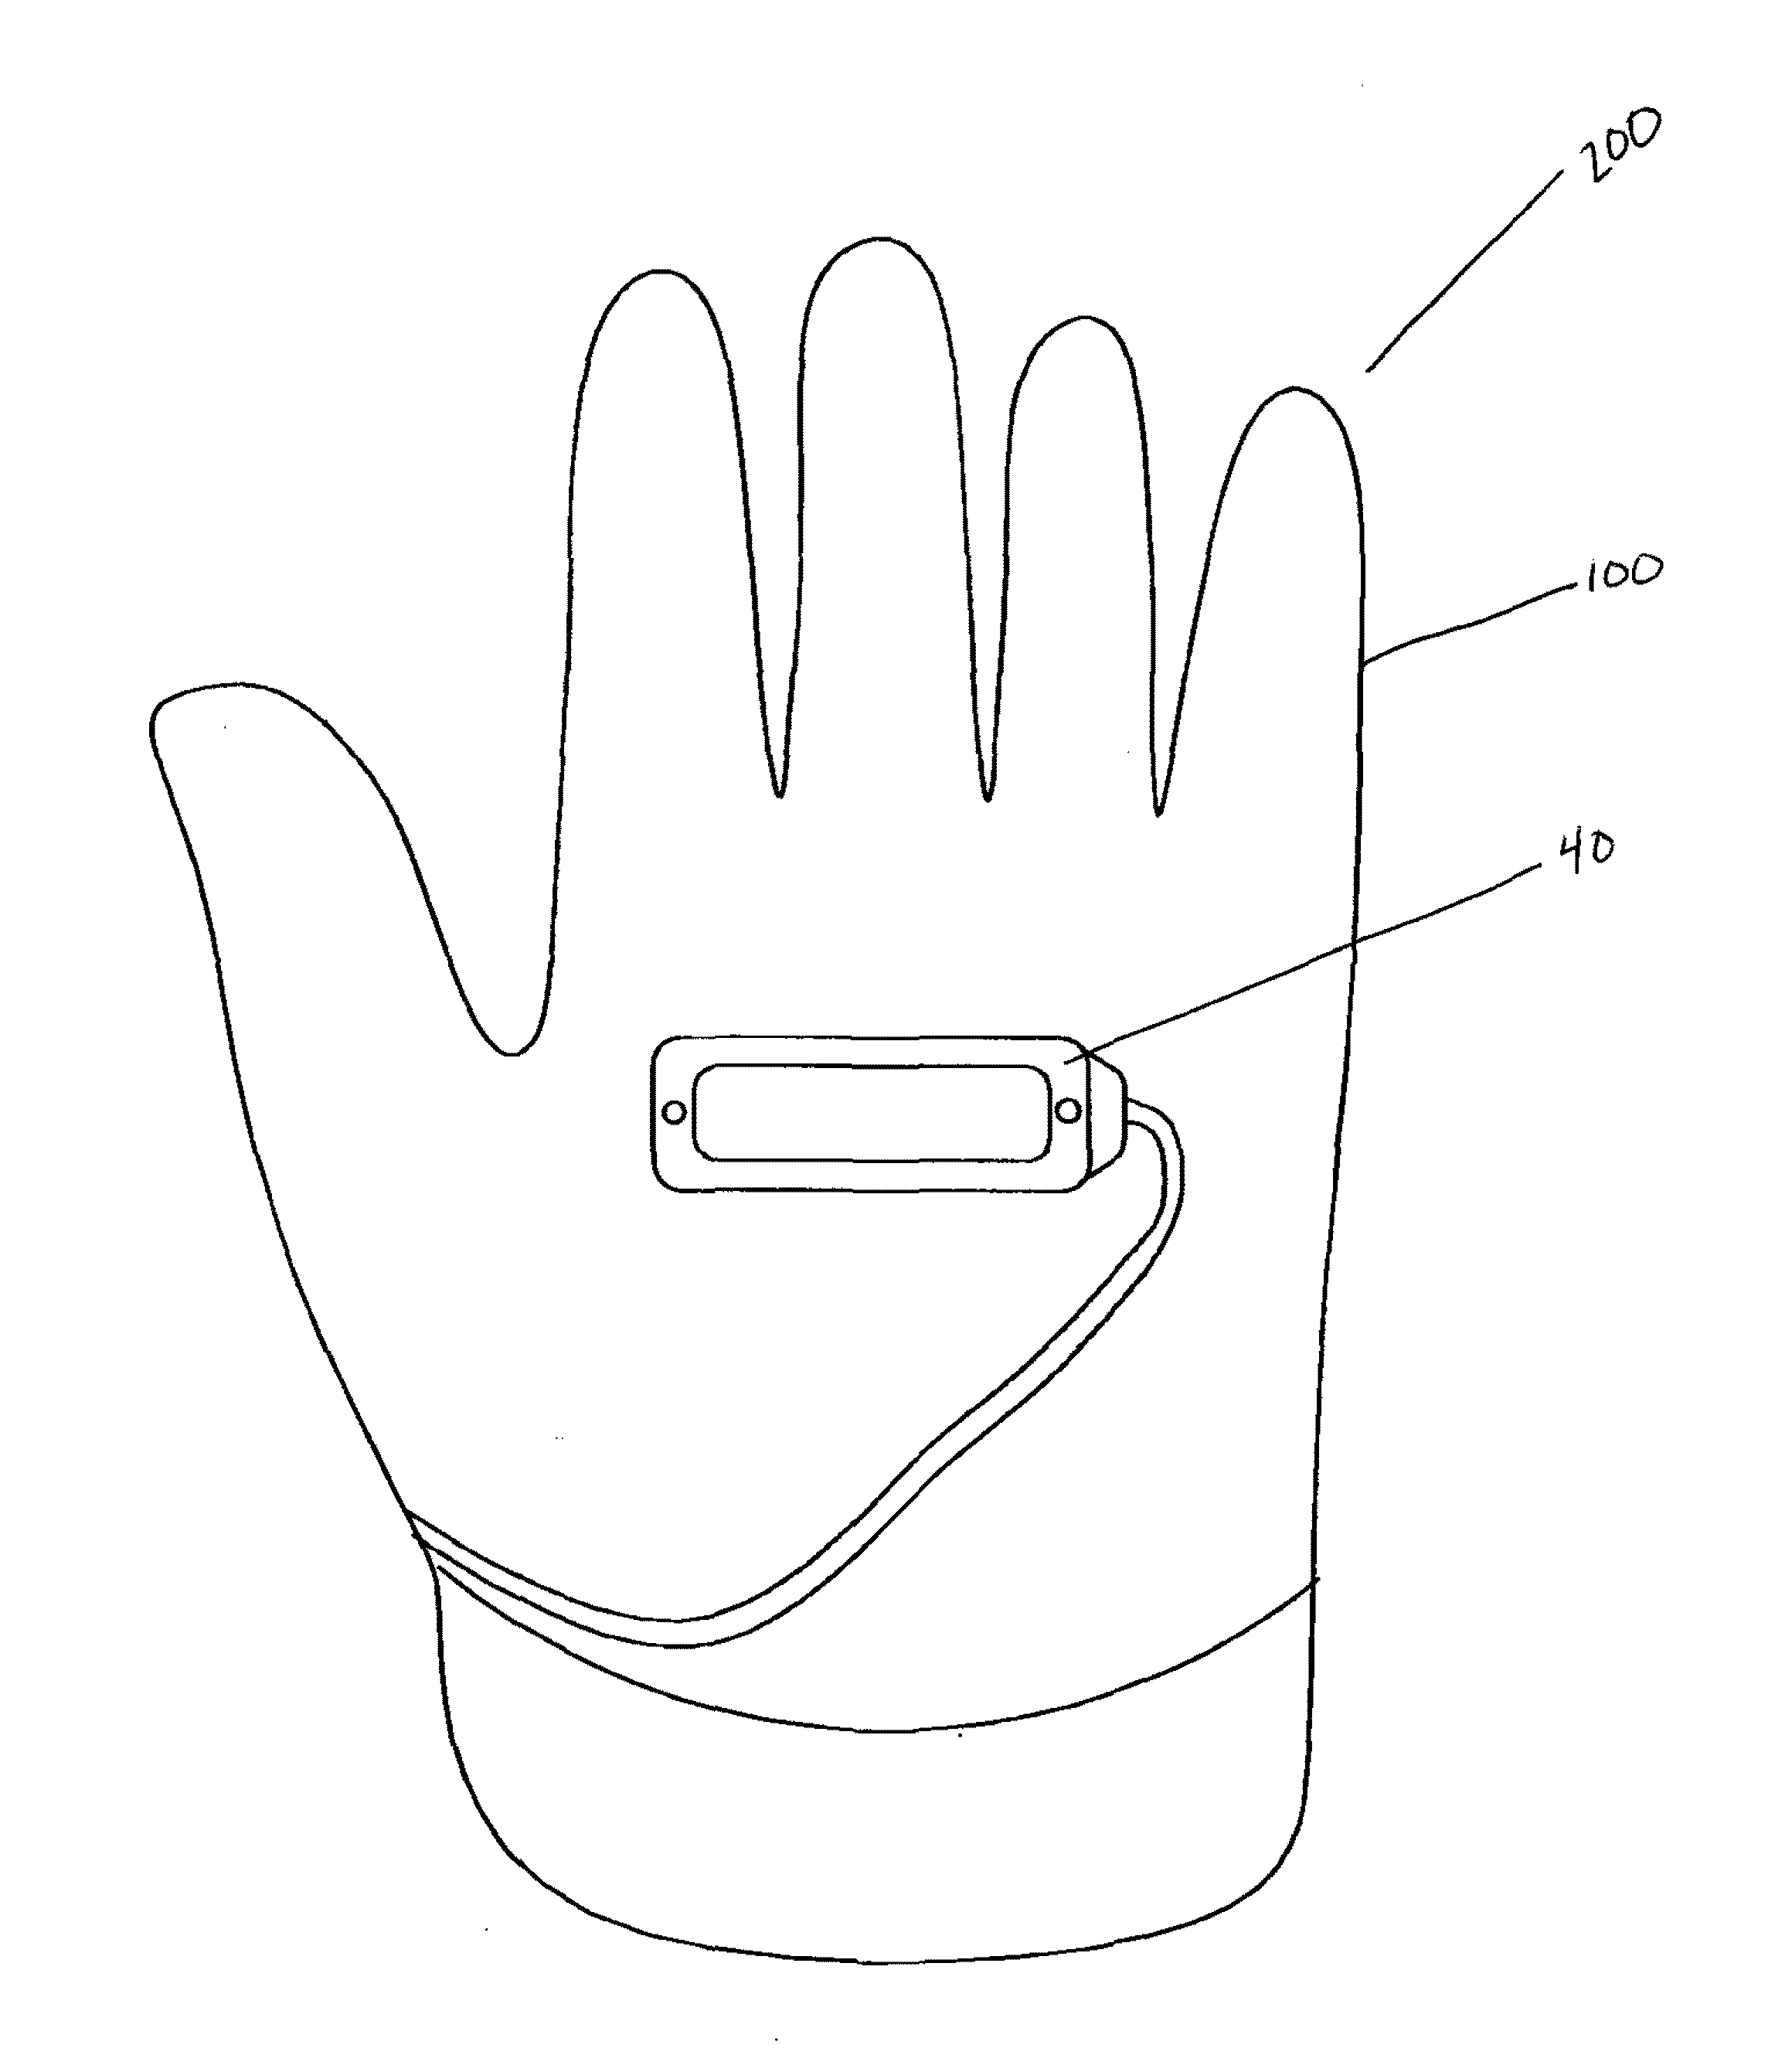 Pressure activated lighted glove